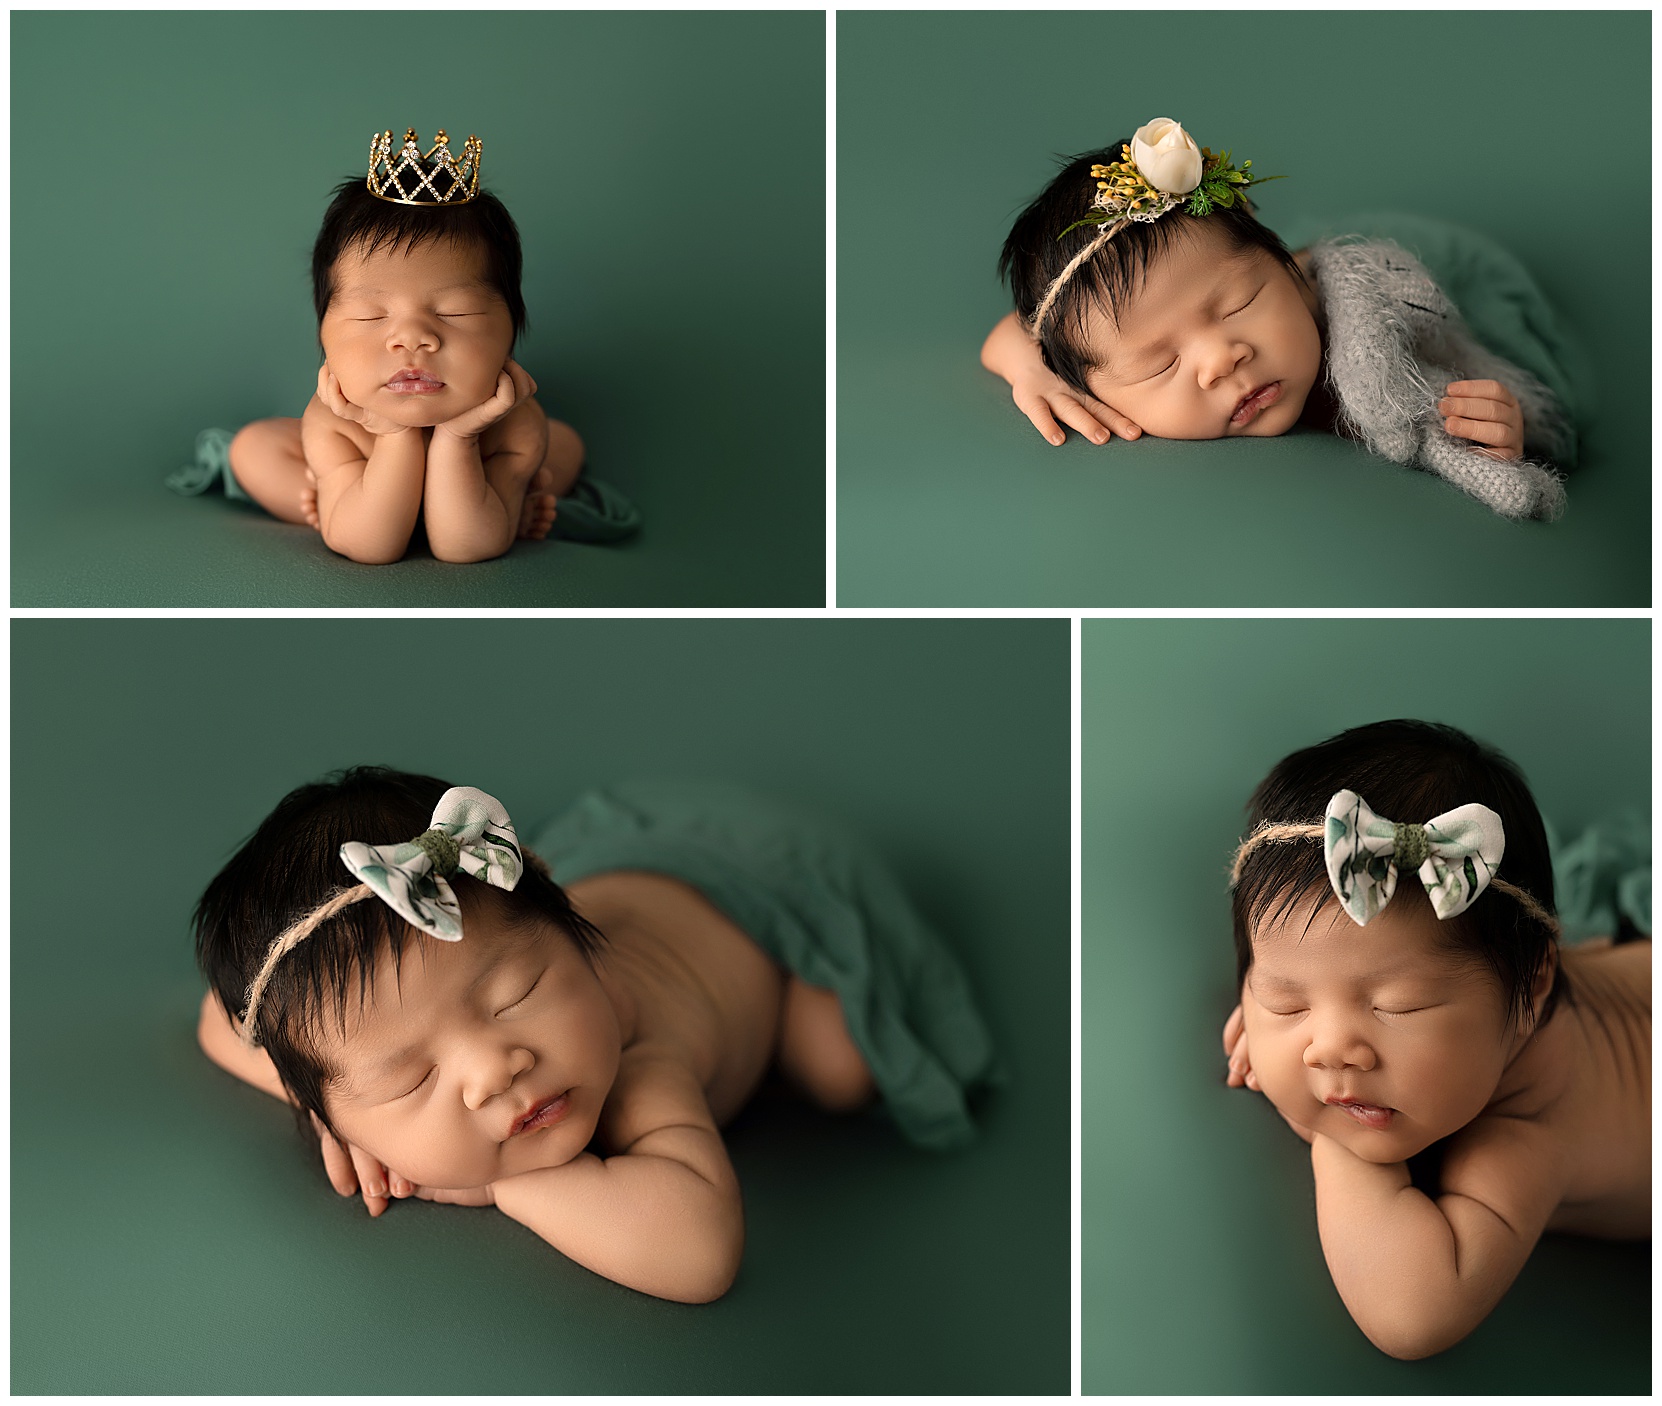 A set of four photos featuring a newborn on a teal green background.